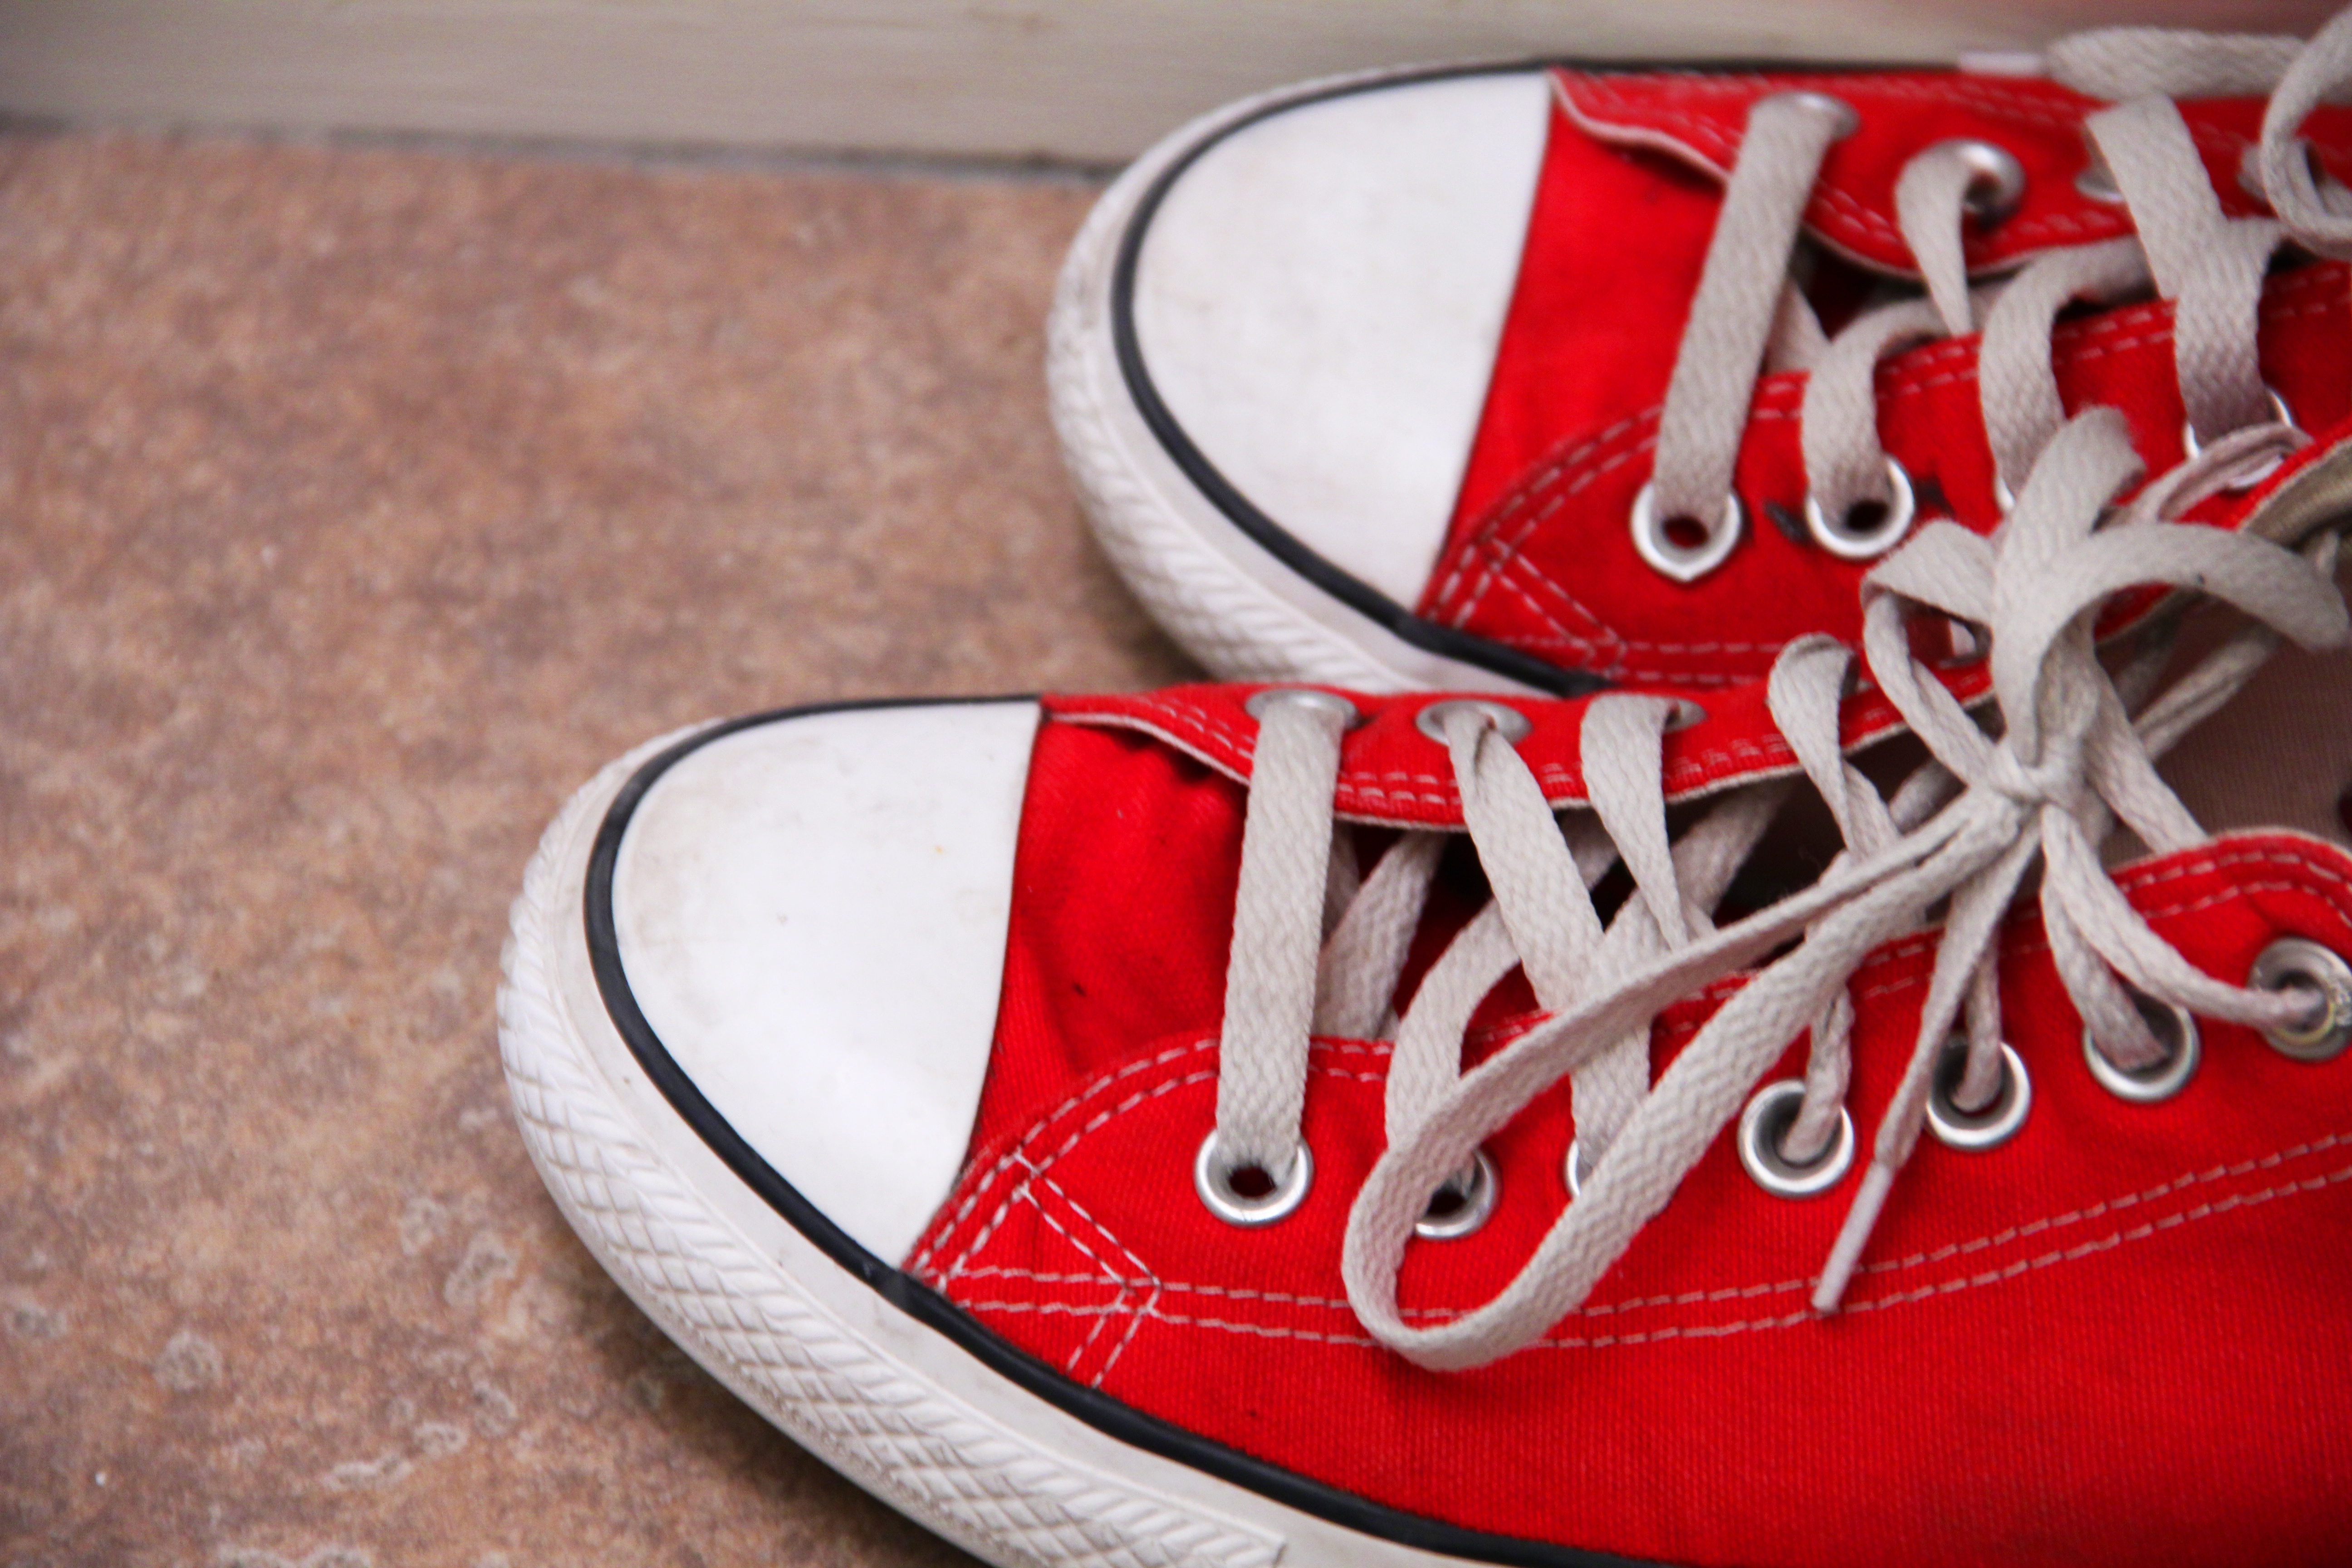 red and white sneakers